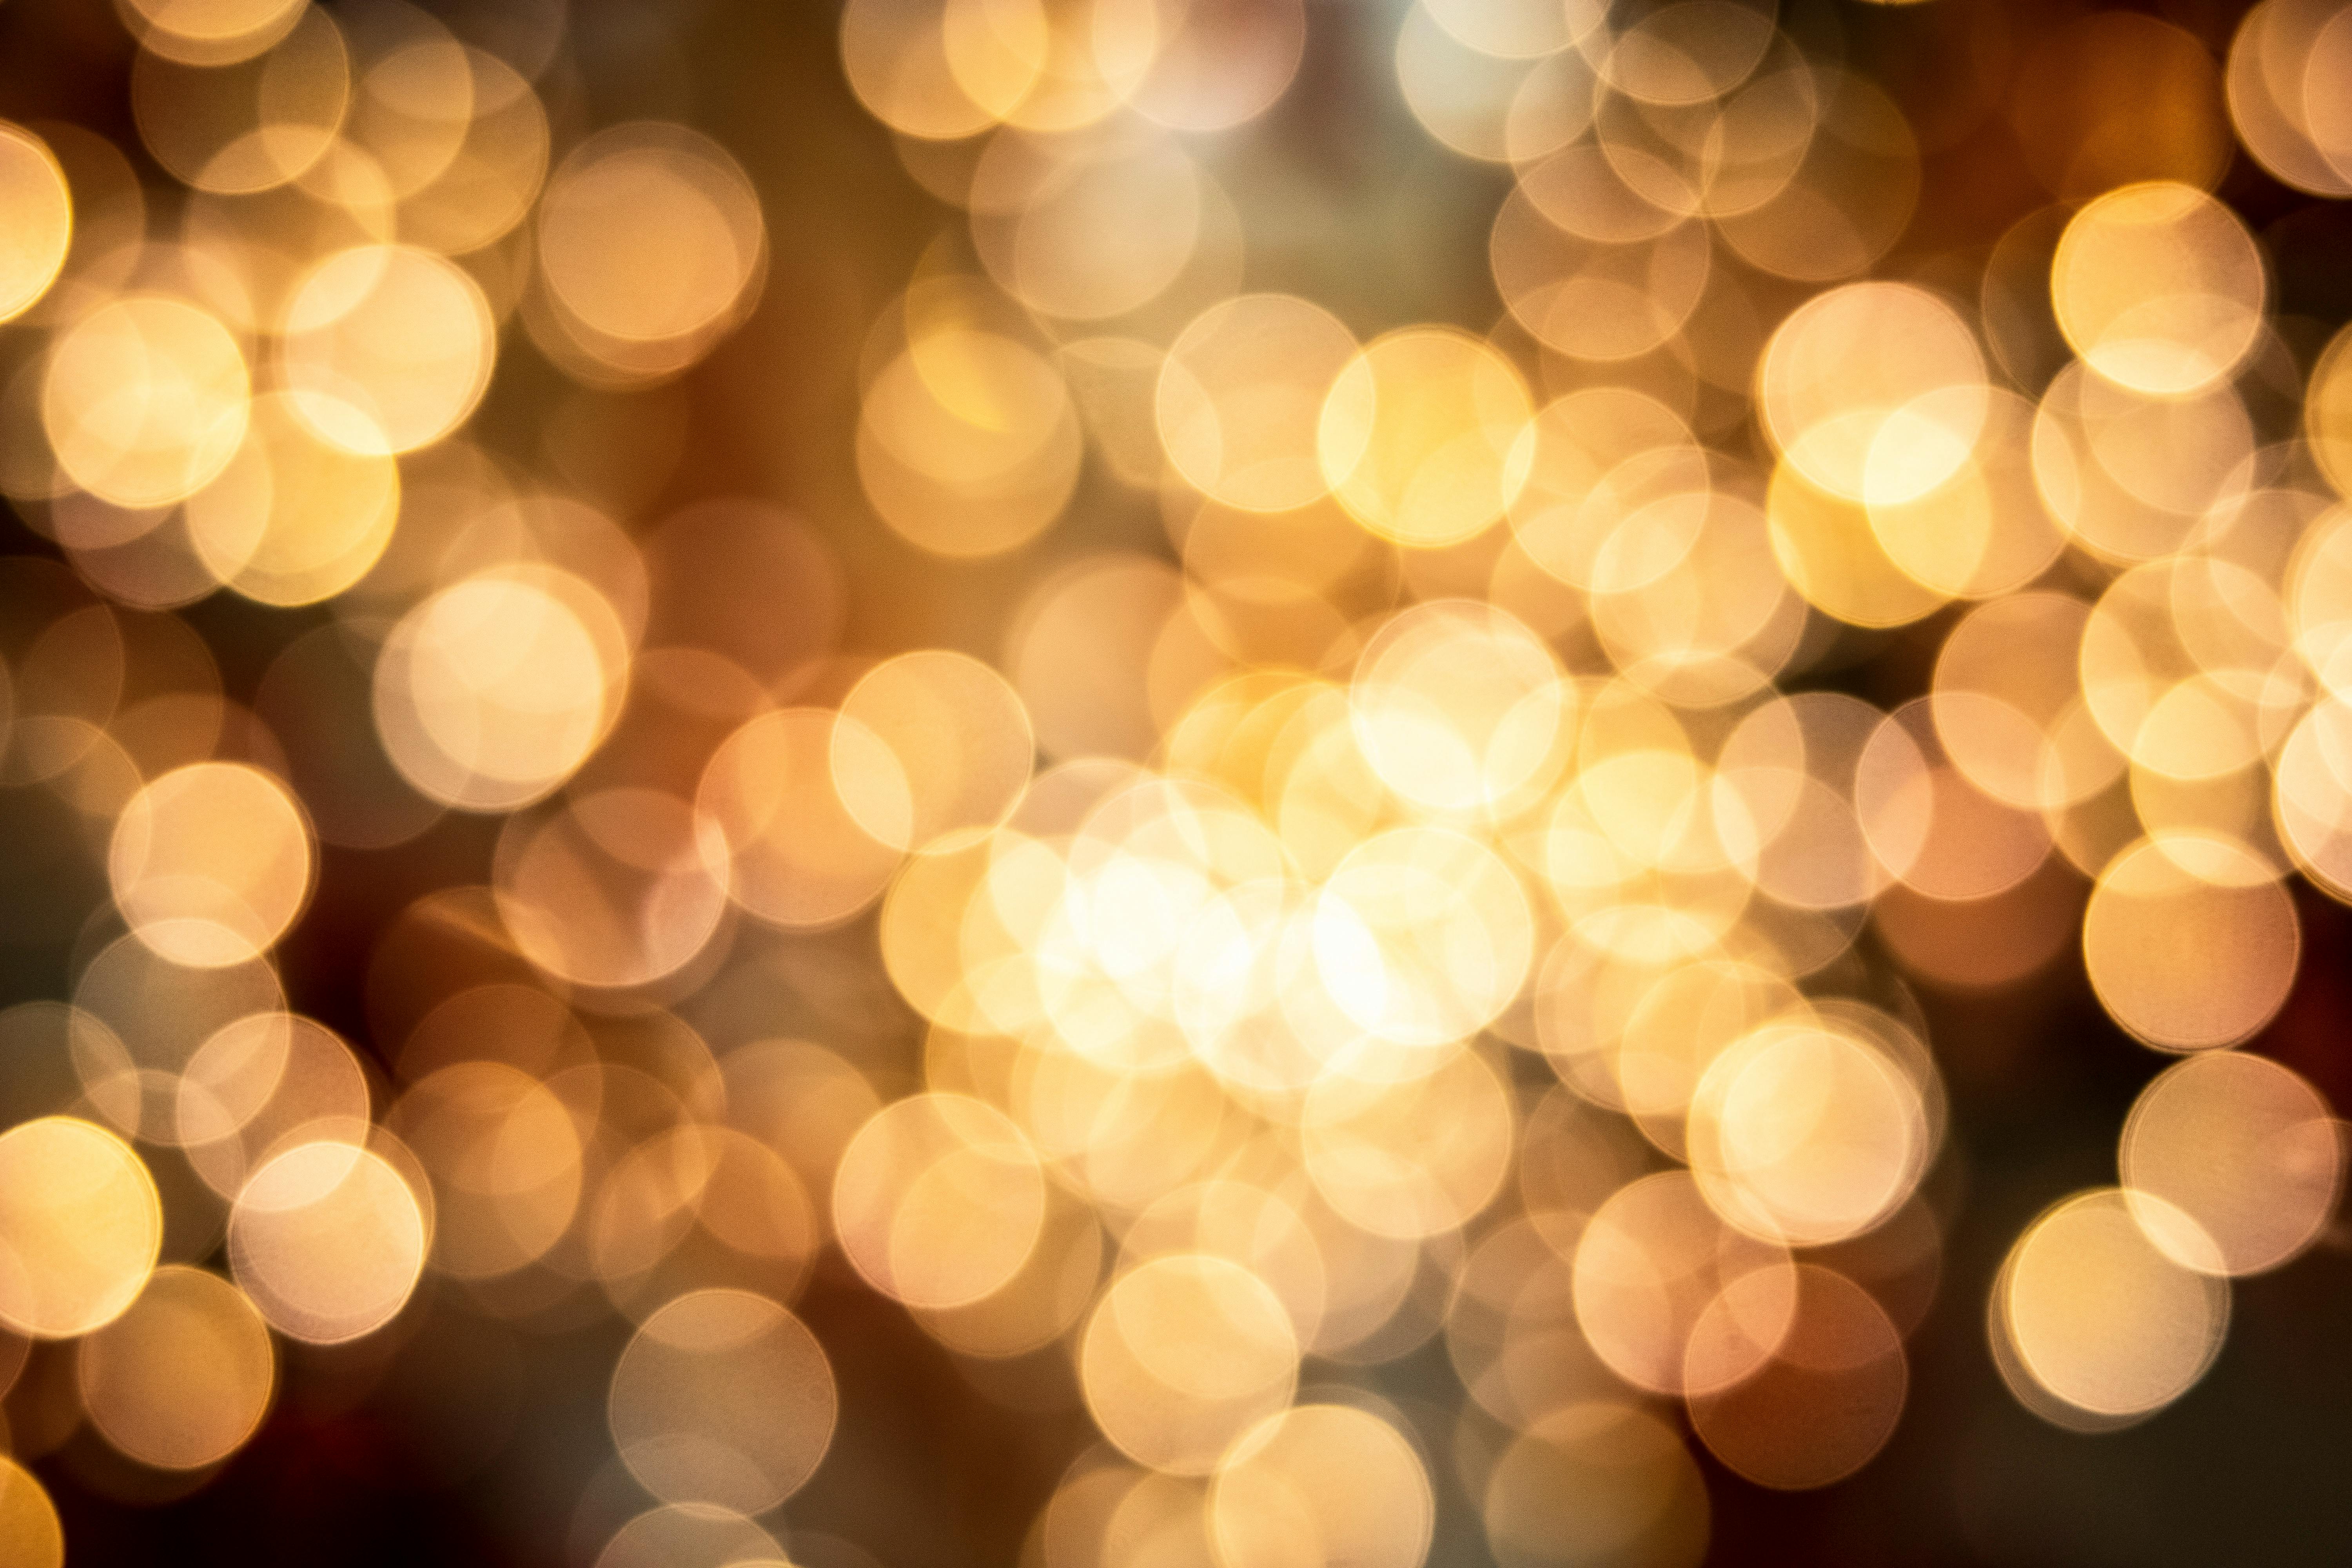 Blurred yellow lights on black background · Free Stock Photo